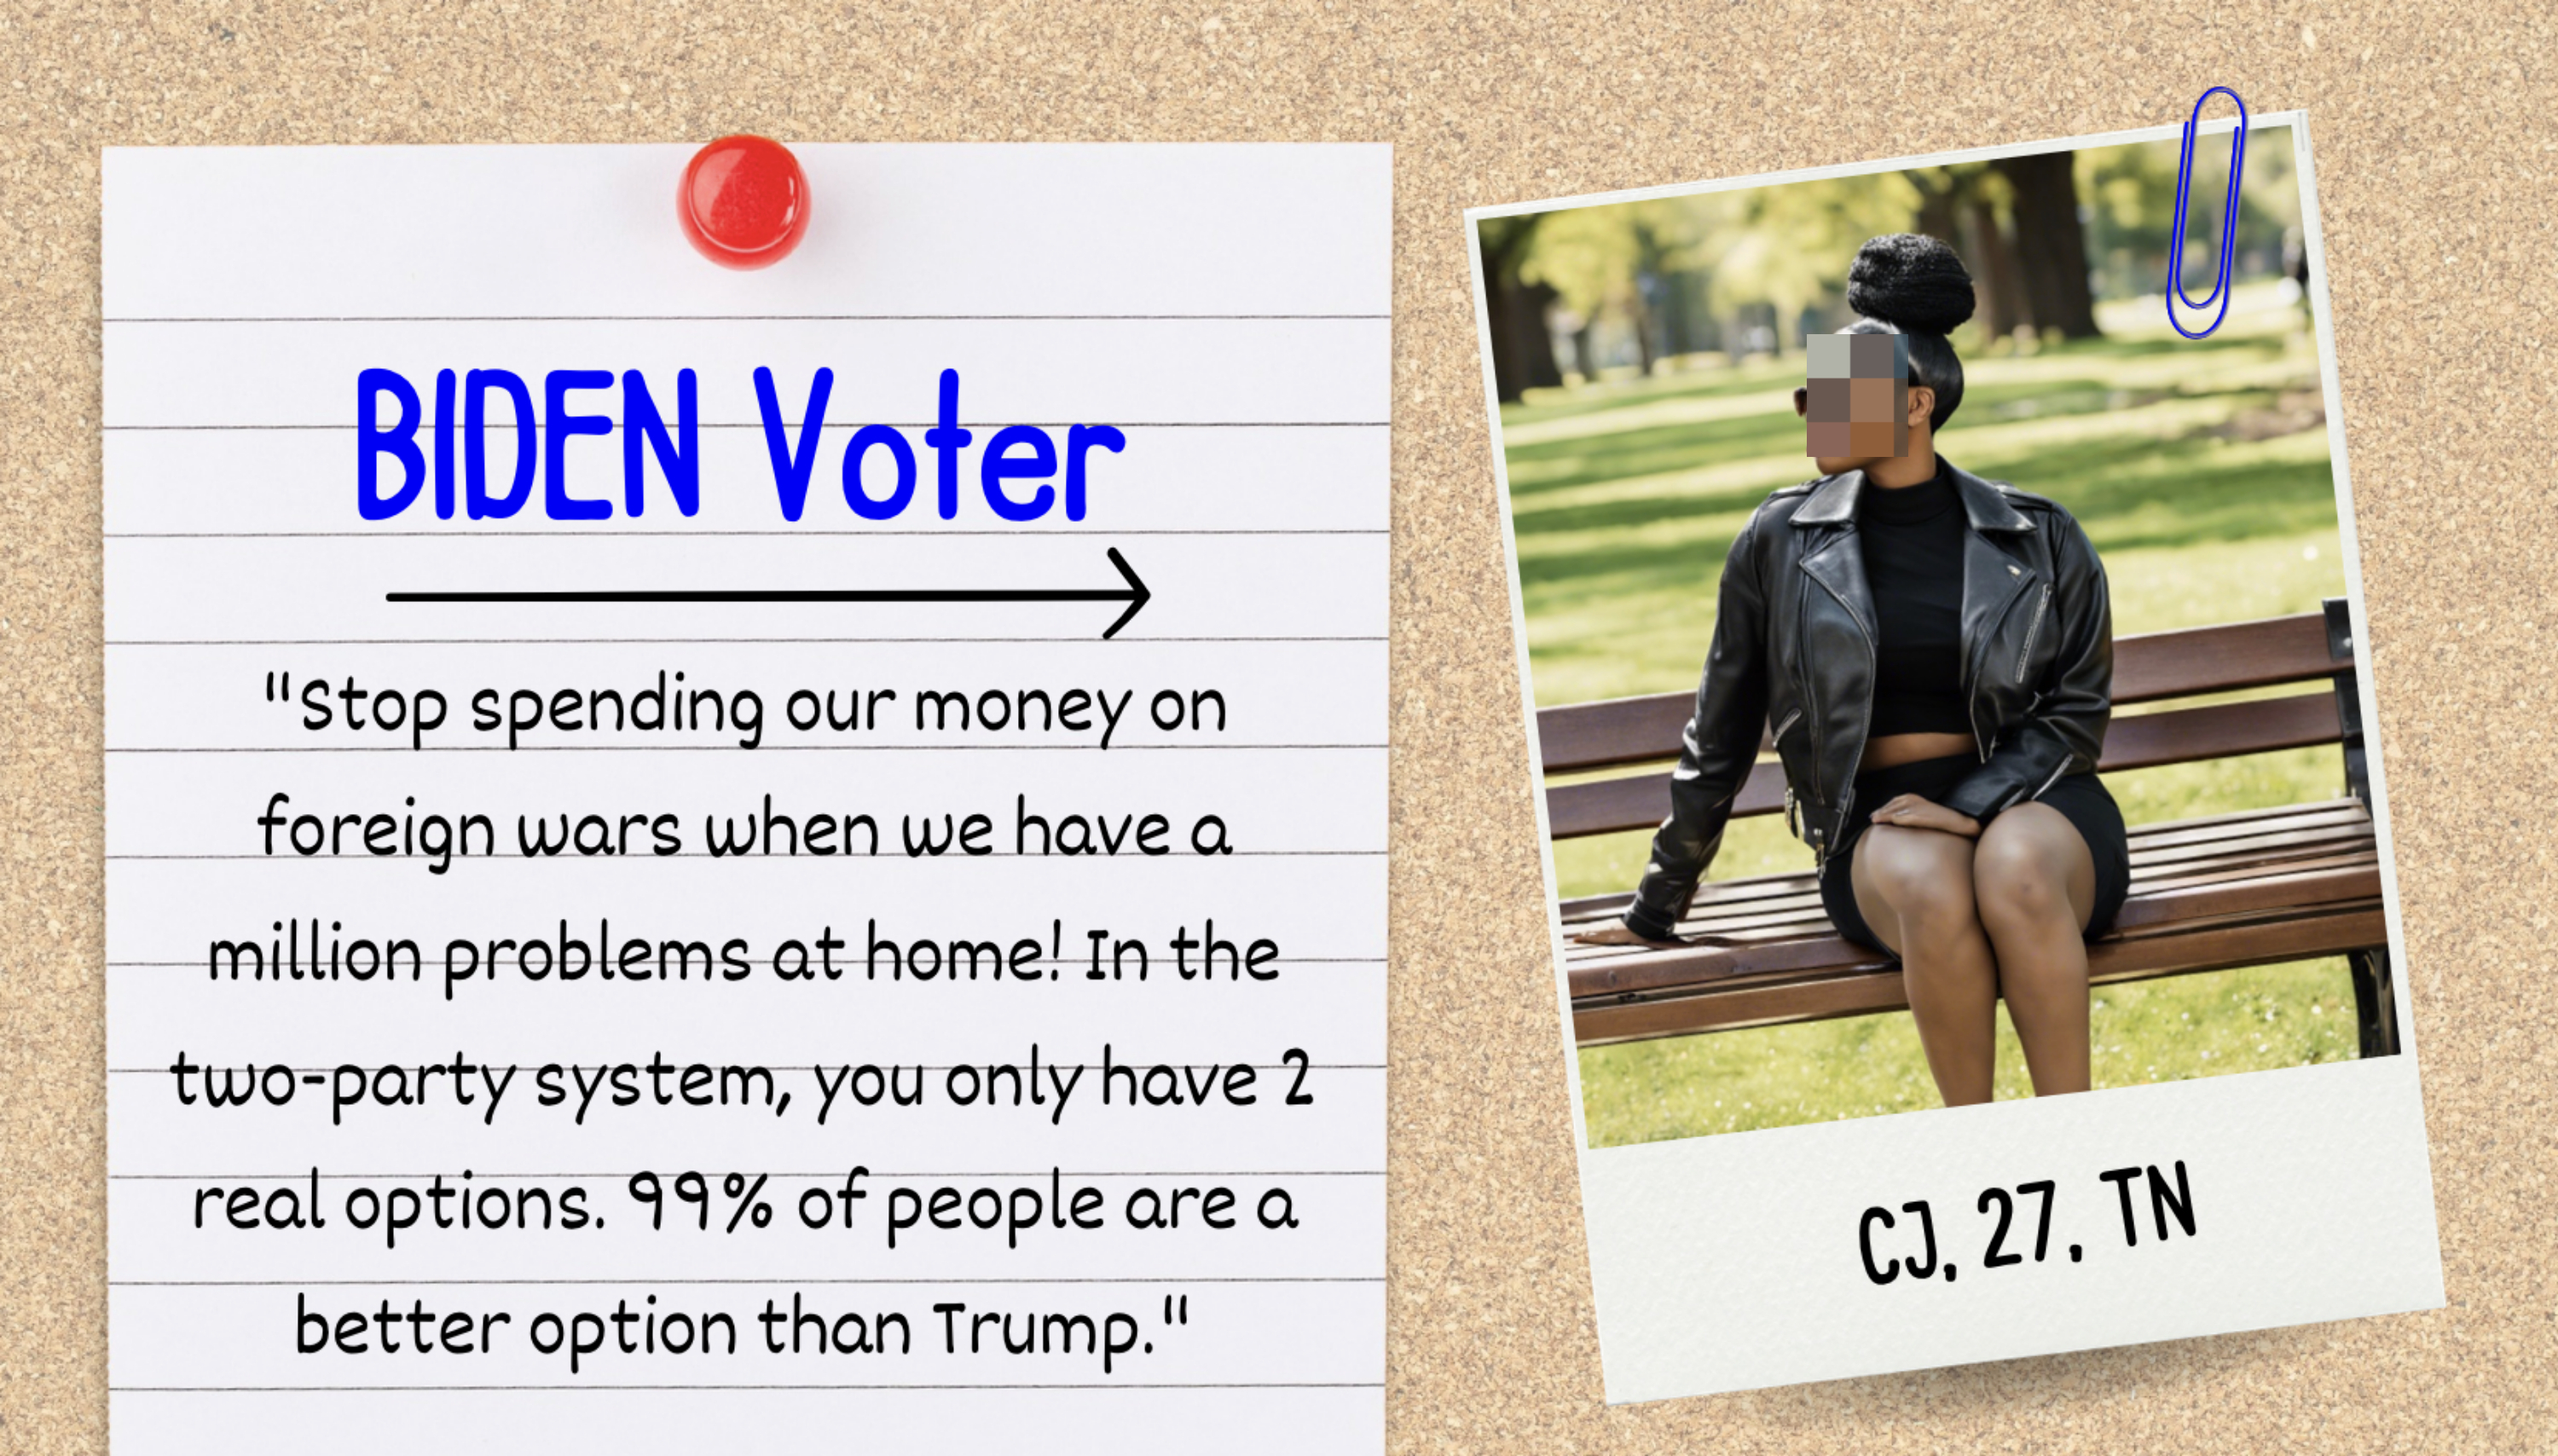 Text: &quot;BIDEN Voter. &#x27;Stop spending our money on foreign wars when we have a million problems at home! In the two-party system, you only have 2 real options. 99% of people are a better option than Trump.&#x27;&quot;

Image of CJ, 27, TN seated on a bench